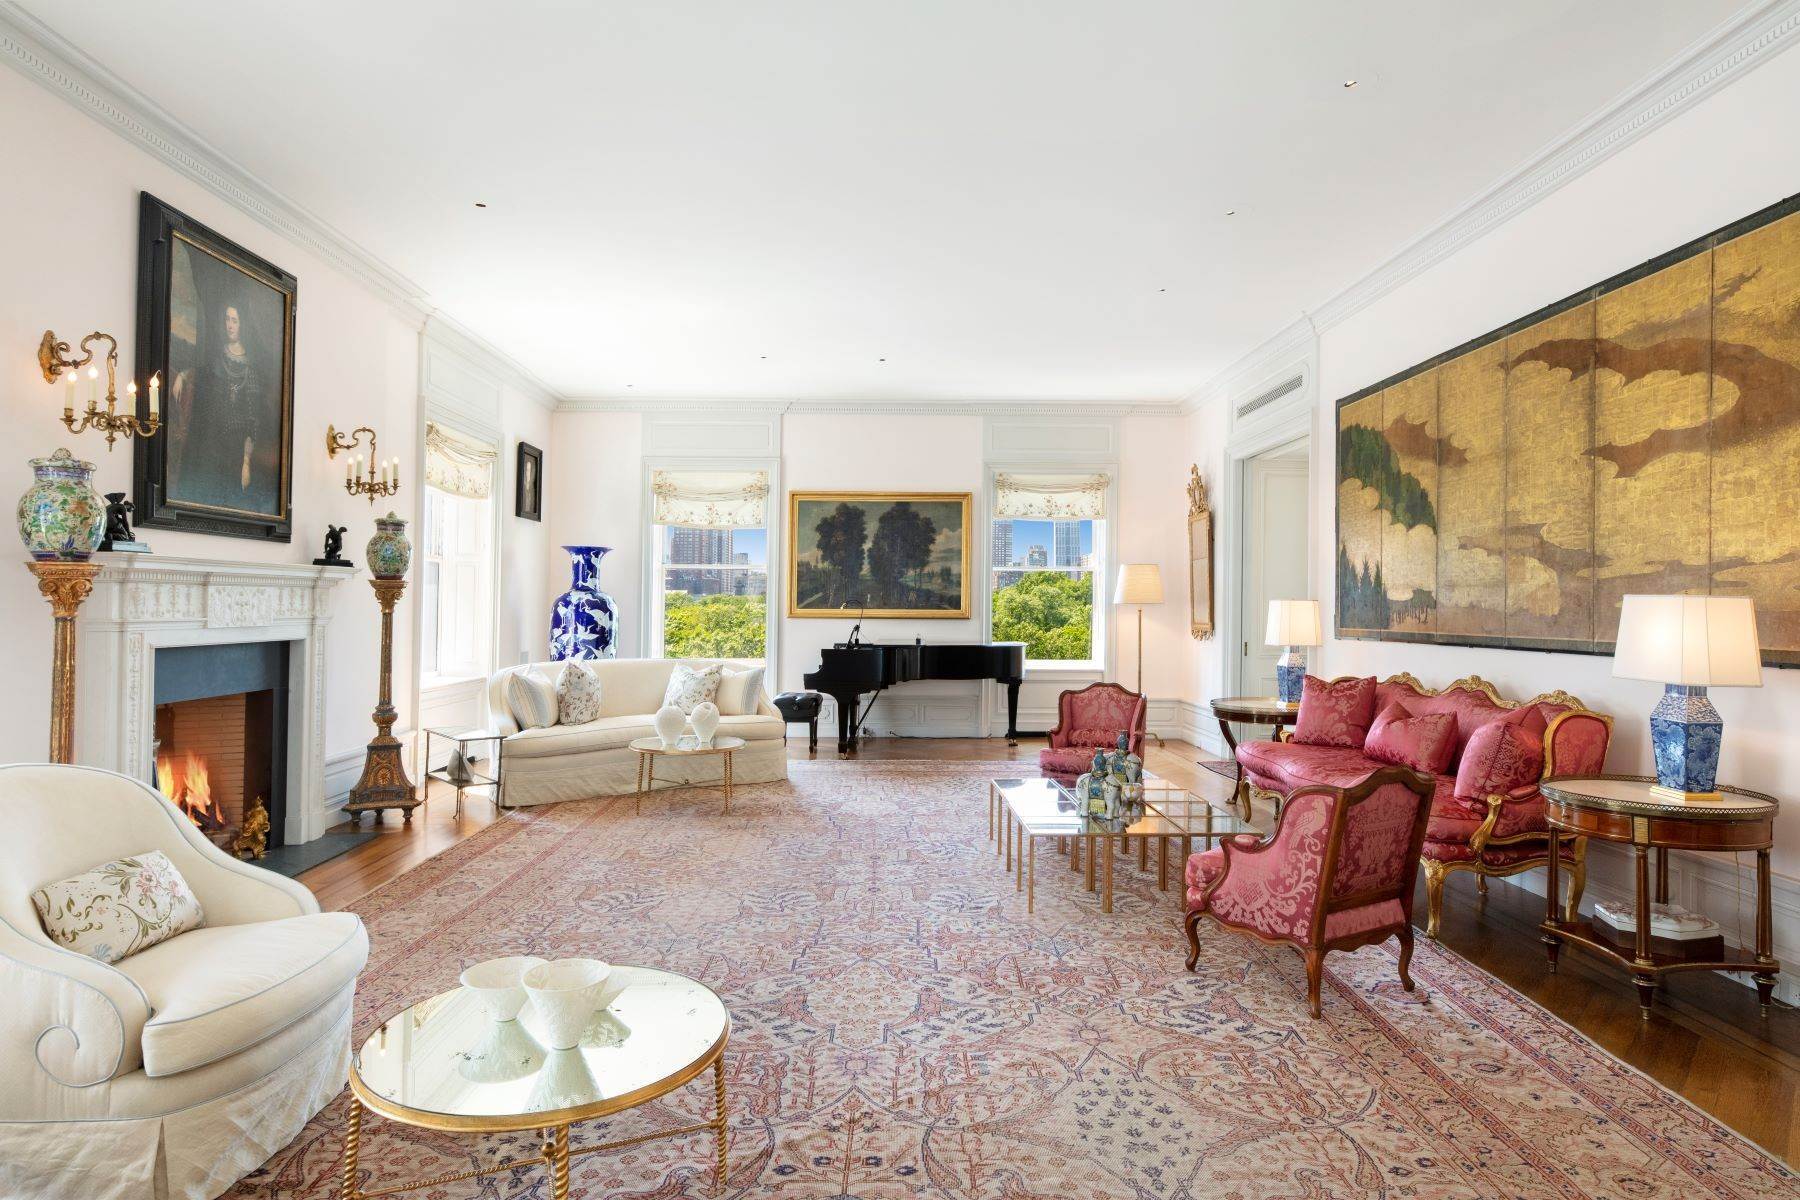 Co-op Properties for Sale at 4 East 66th Street, 7 New York, New York 10065 United States